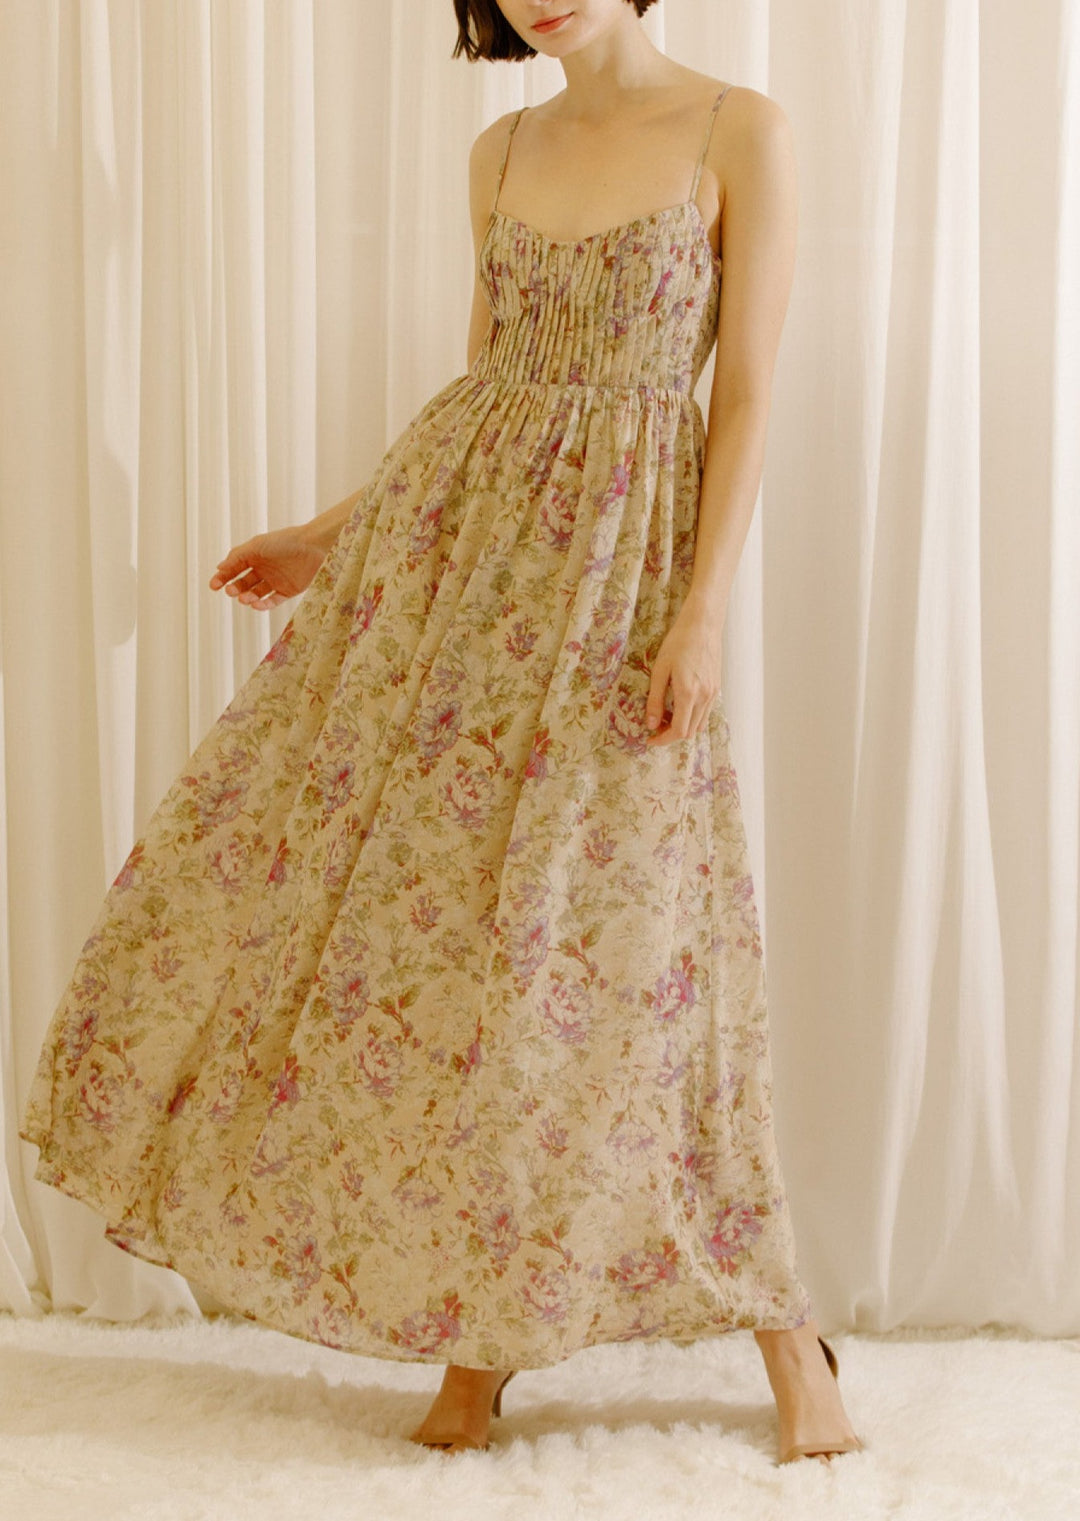 Floral pleated maxi dress.